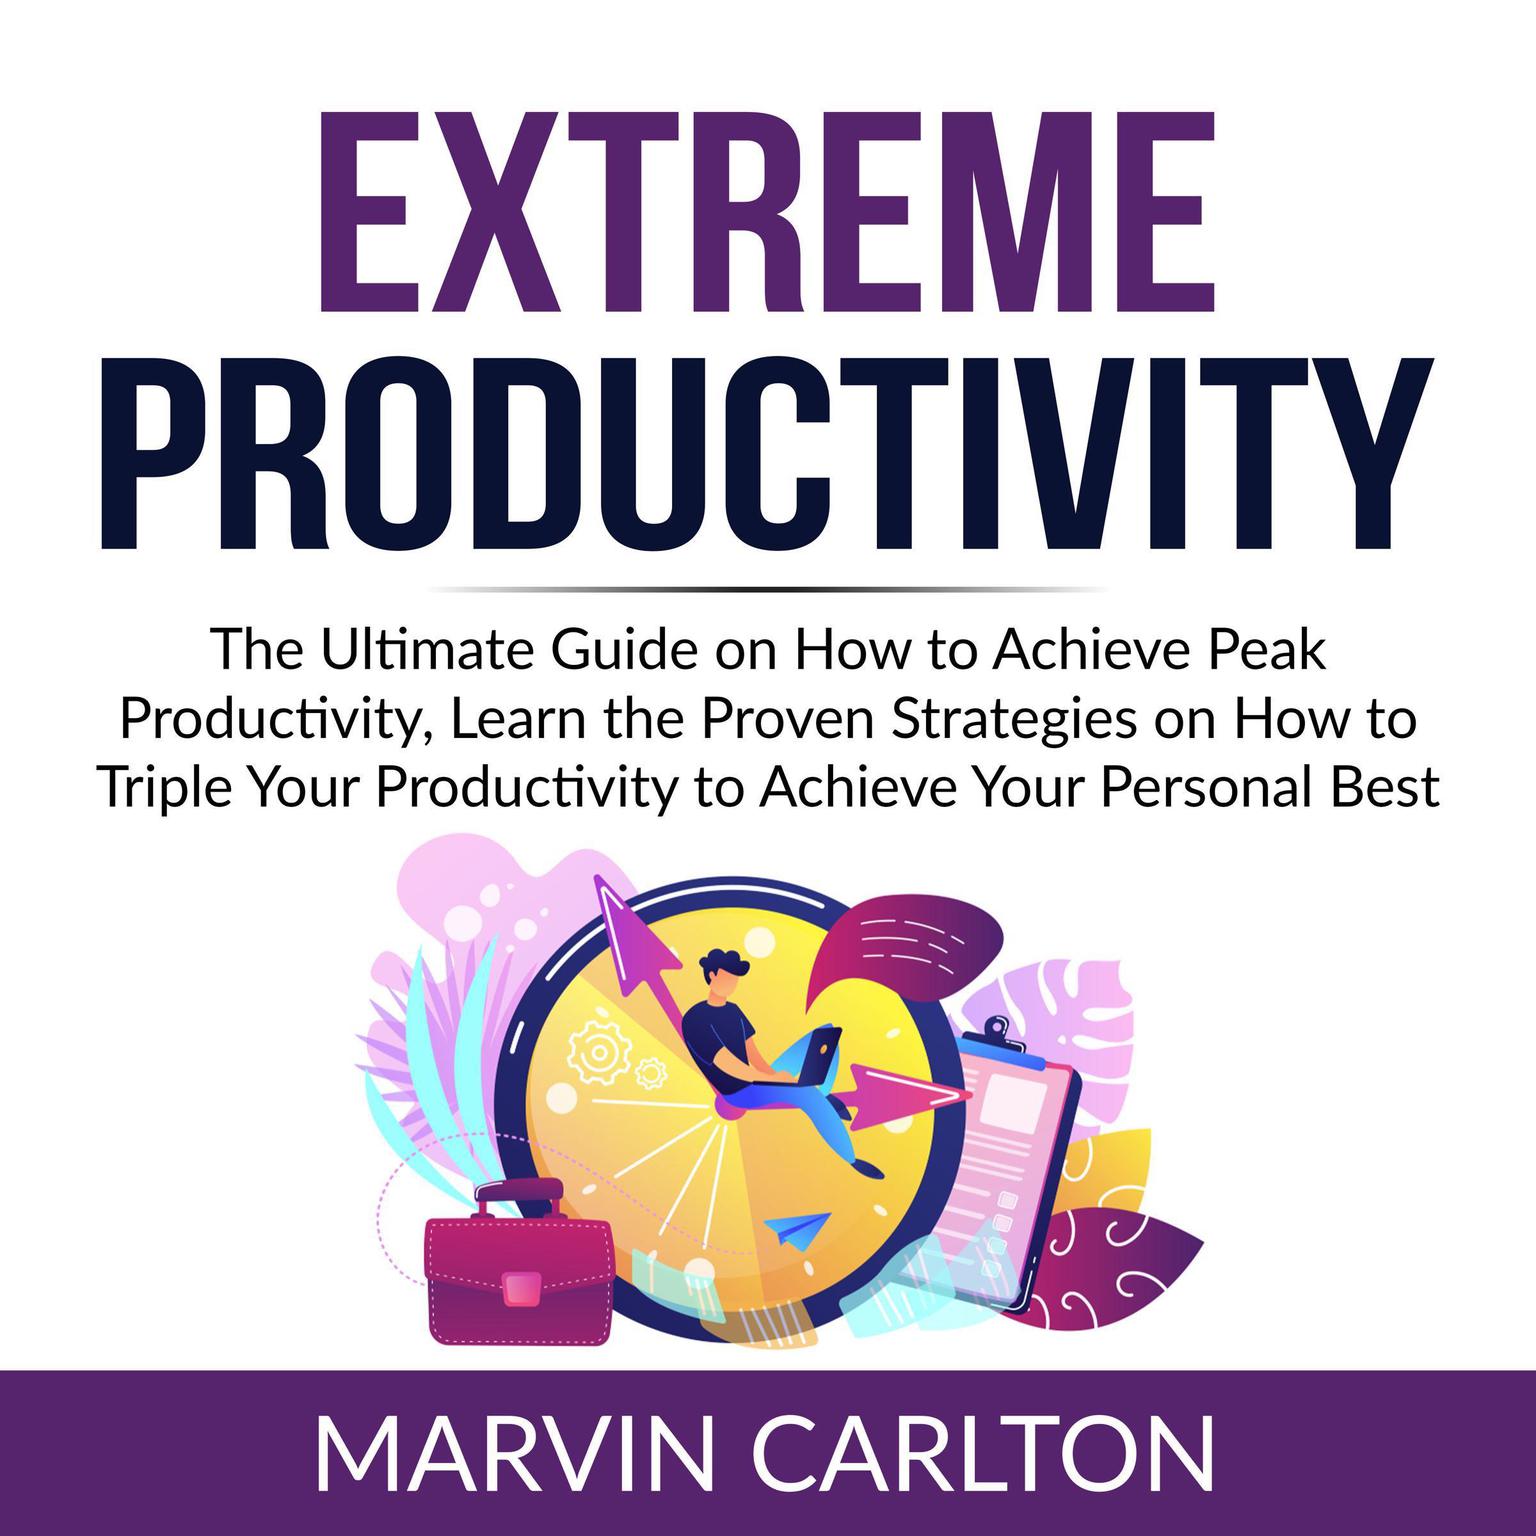 Extreme Productivity:: The Ultimate Guide on How to Achieve Peak Productivity, Learn the Proven Strategies on How to Triple Your Productivity to Achieve Your Personal Best  Audiobook, by Marvin Carlton